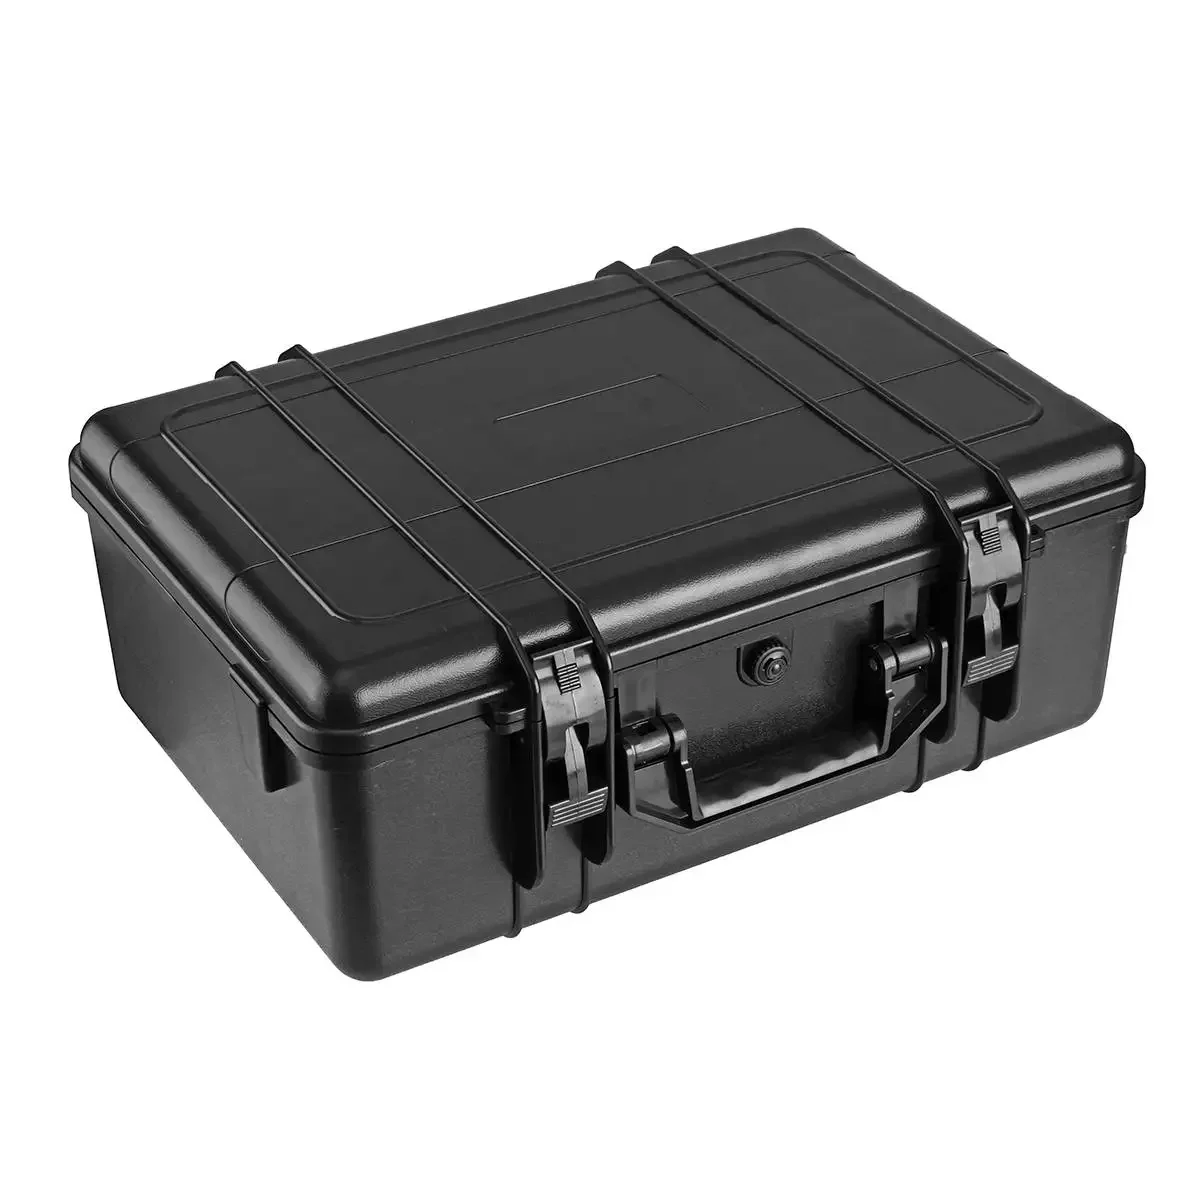 

Waterproof ABS Plastic Sealed Tool Box Safety Equipment Protection Toolbox Shockproof Suitcase Impact Resistant Tool Case